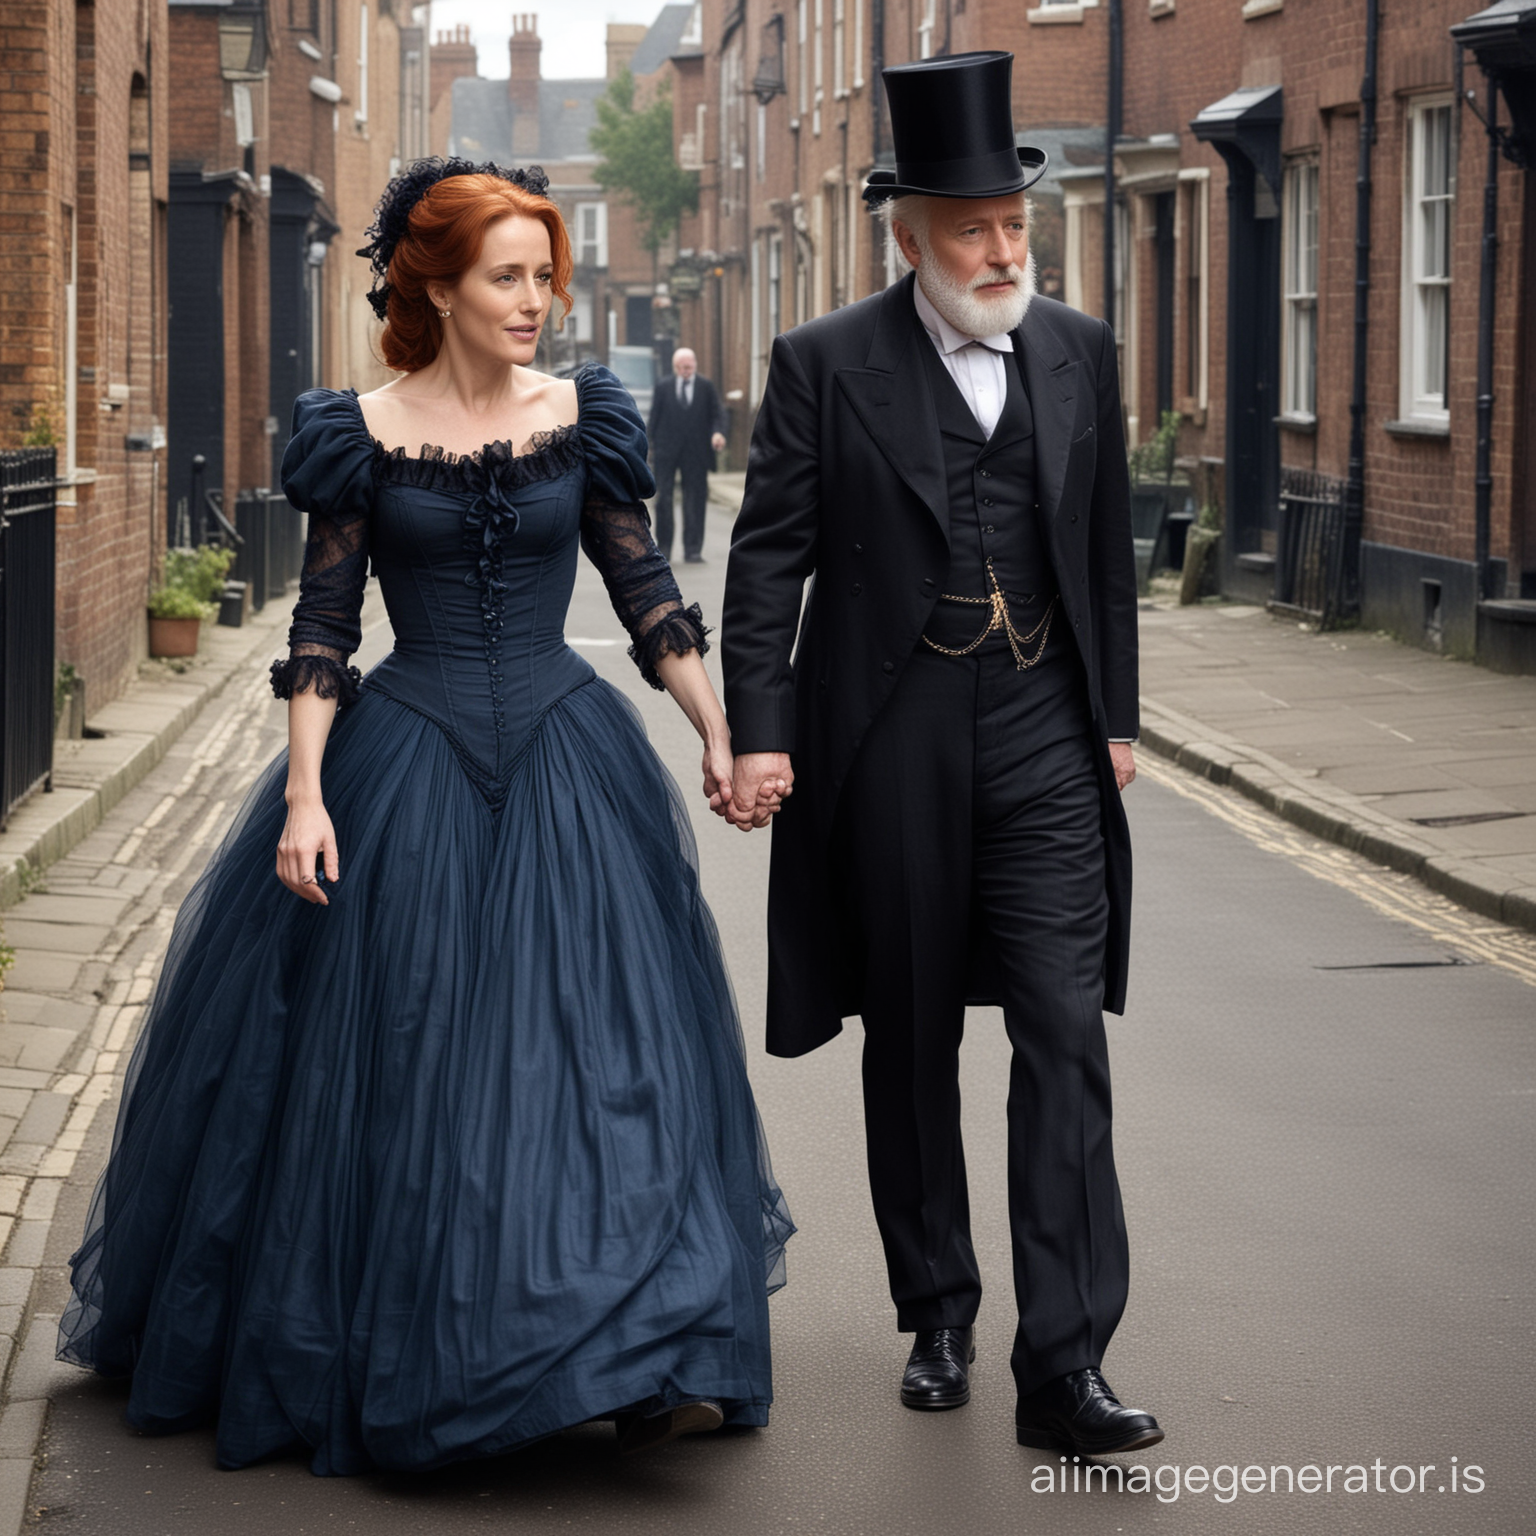 red hair Gillian Anderson wearing a dark blue floor-length loose billowing 1860 Victorian crinoline poofy dress with a frilly bonnet walking on a Victorian era street with an old man dressed into a black Victorian suit who seems to be her newlywed husband